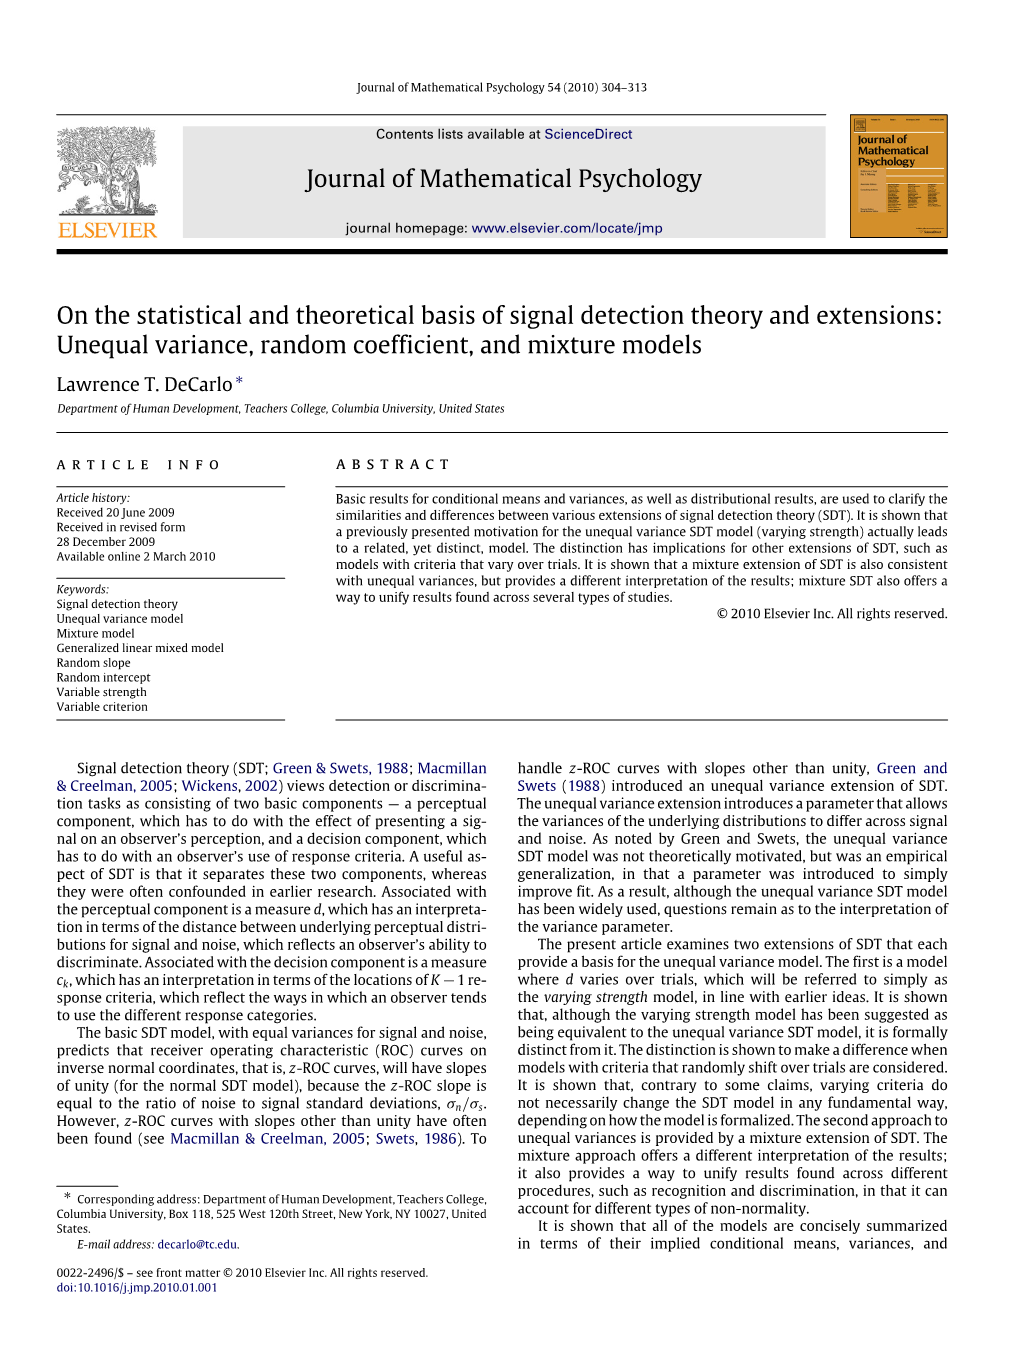 Journal of Mathematical Psychology on the Statistical and Theoretical